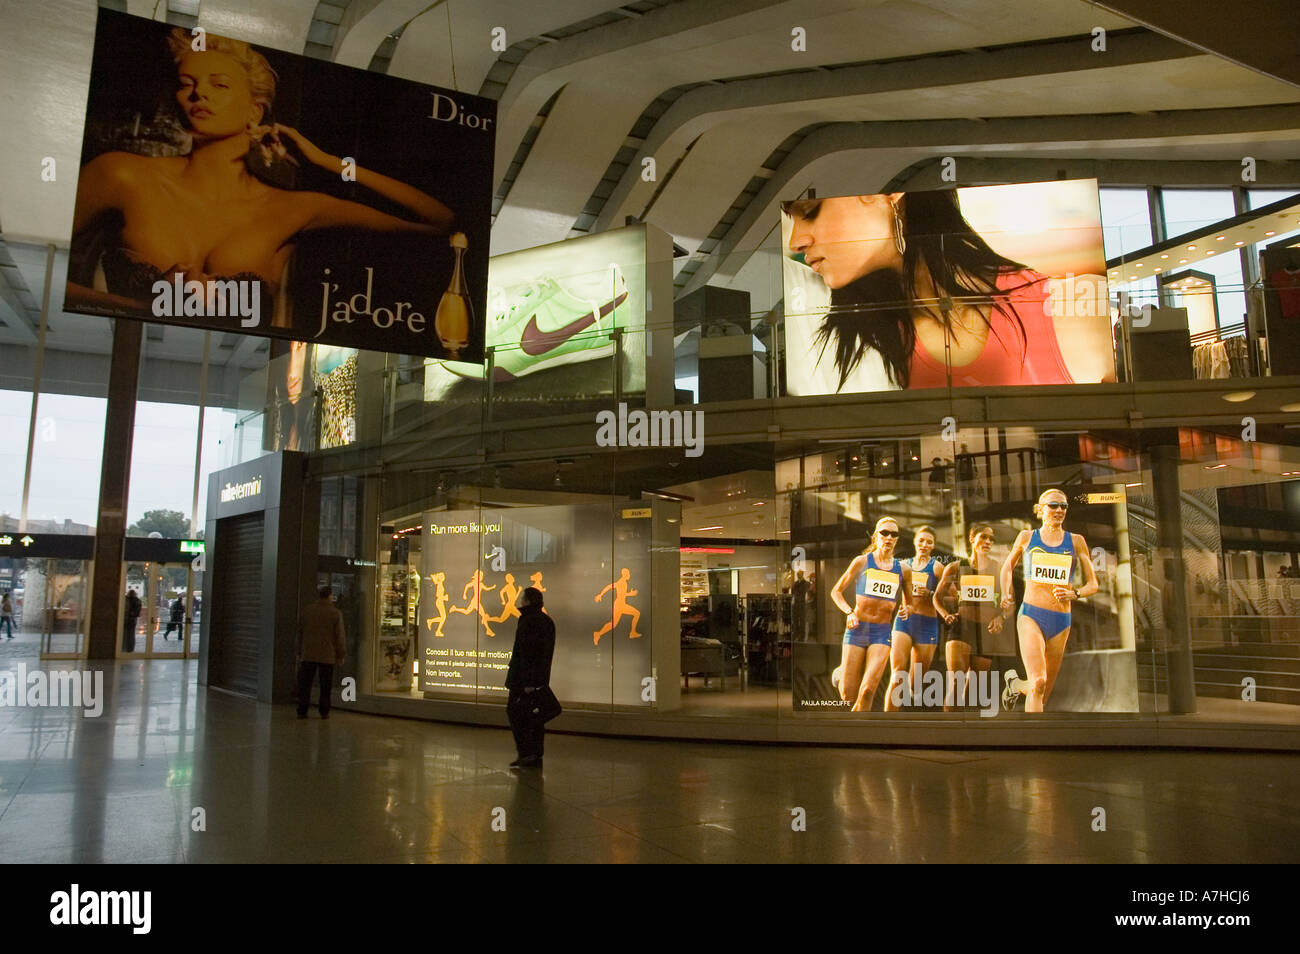 Large advertisements for Nike and Dior in Rome Termini station Stock Photo  - Alamy